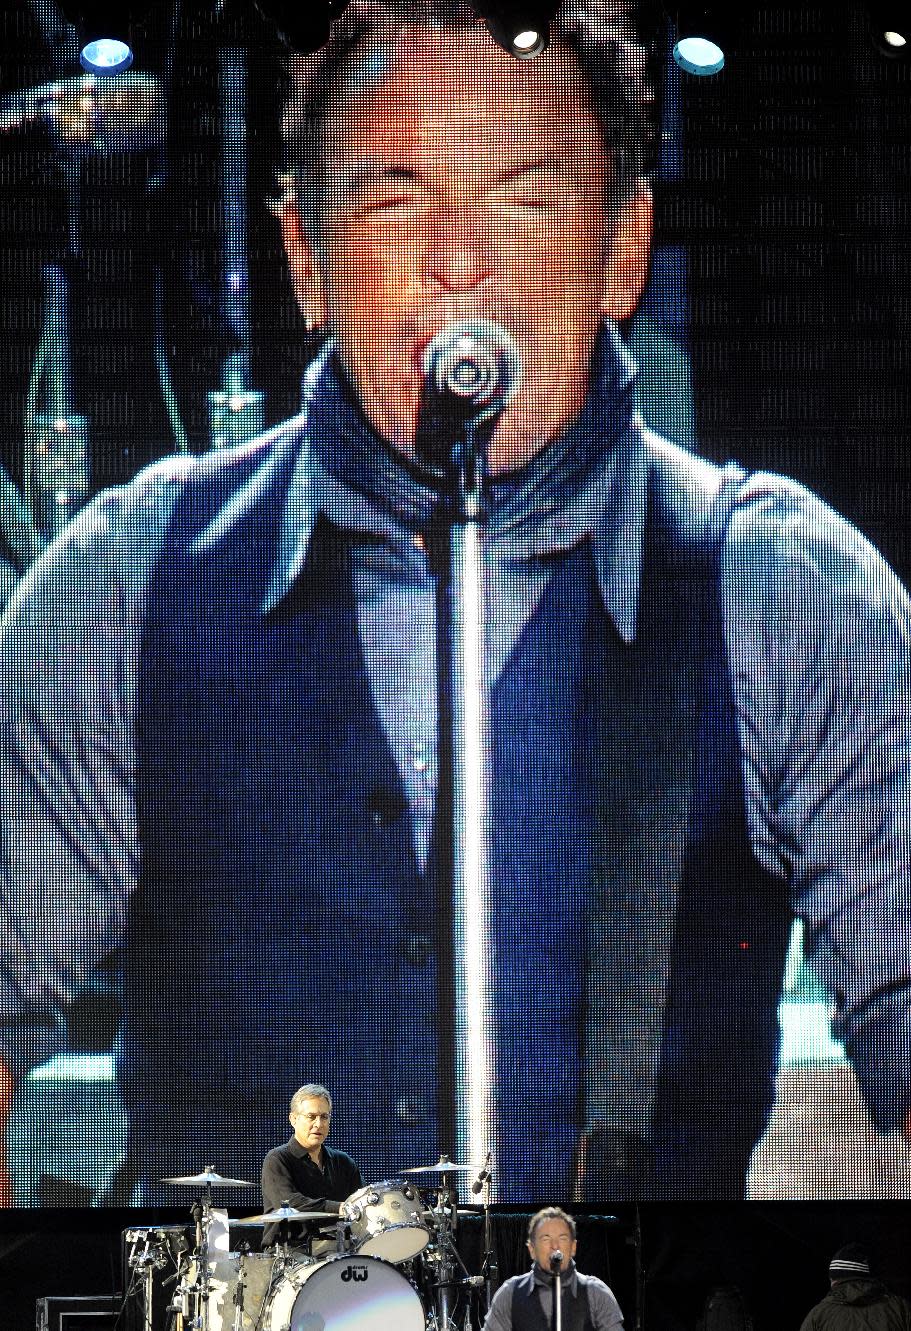 Bruce Springsteen performs with the E Street Band during the 2014 NCAA March Madness Music Festival - Capital One JamFest, Sunday, April 6, 2014 in Dallas. (Photo by Matt Strasen/Invision/AP)